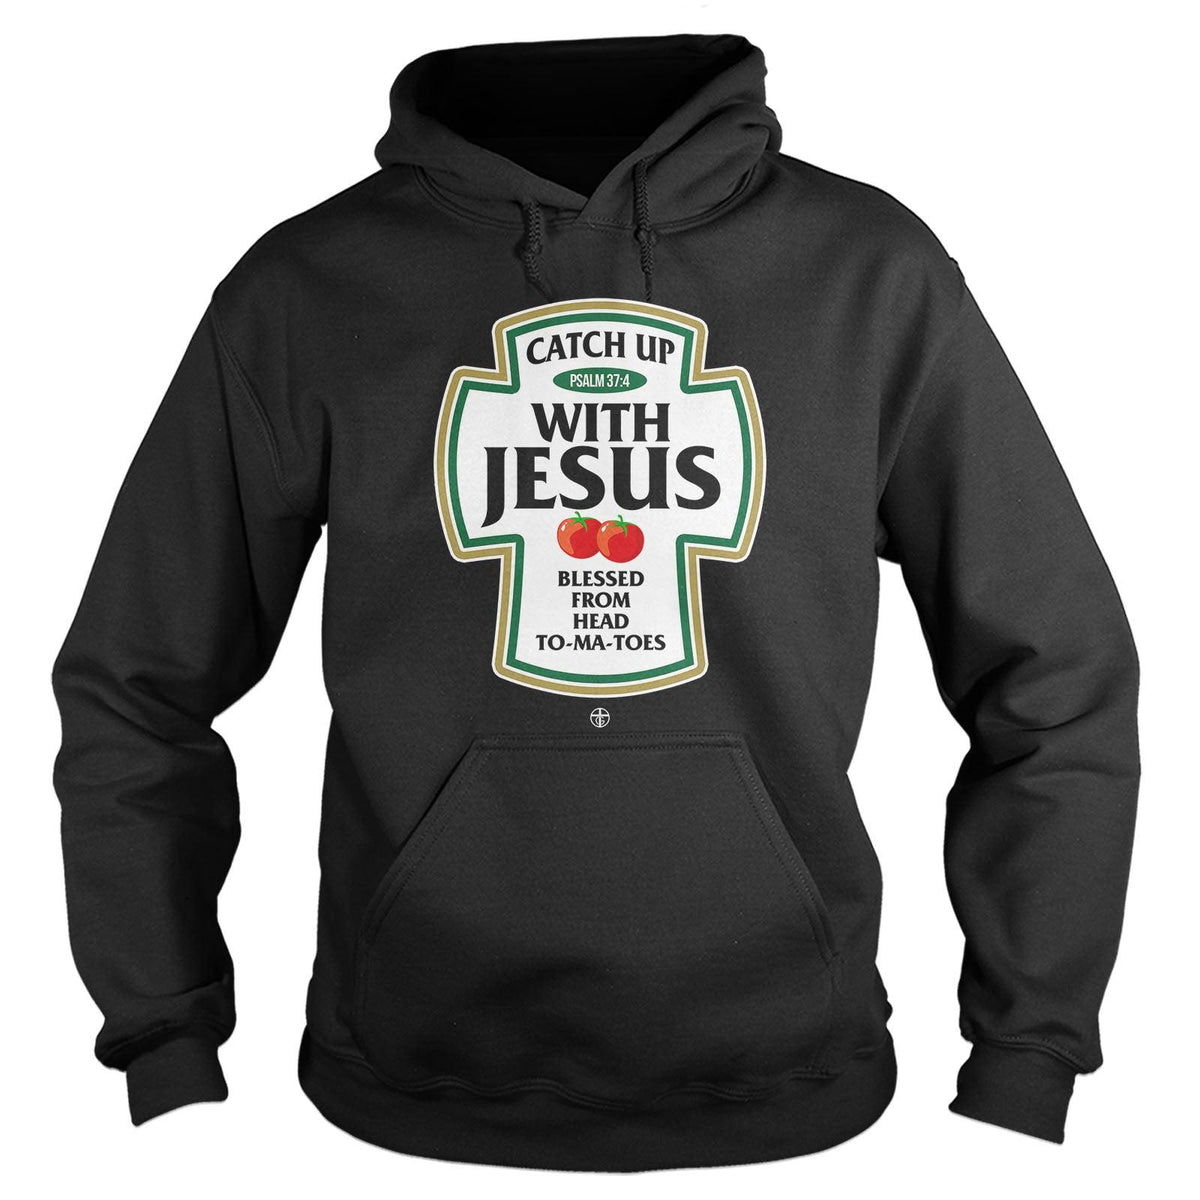 Catch Up With Jesus Hoodie - Our True God